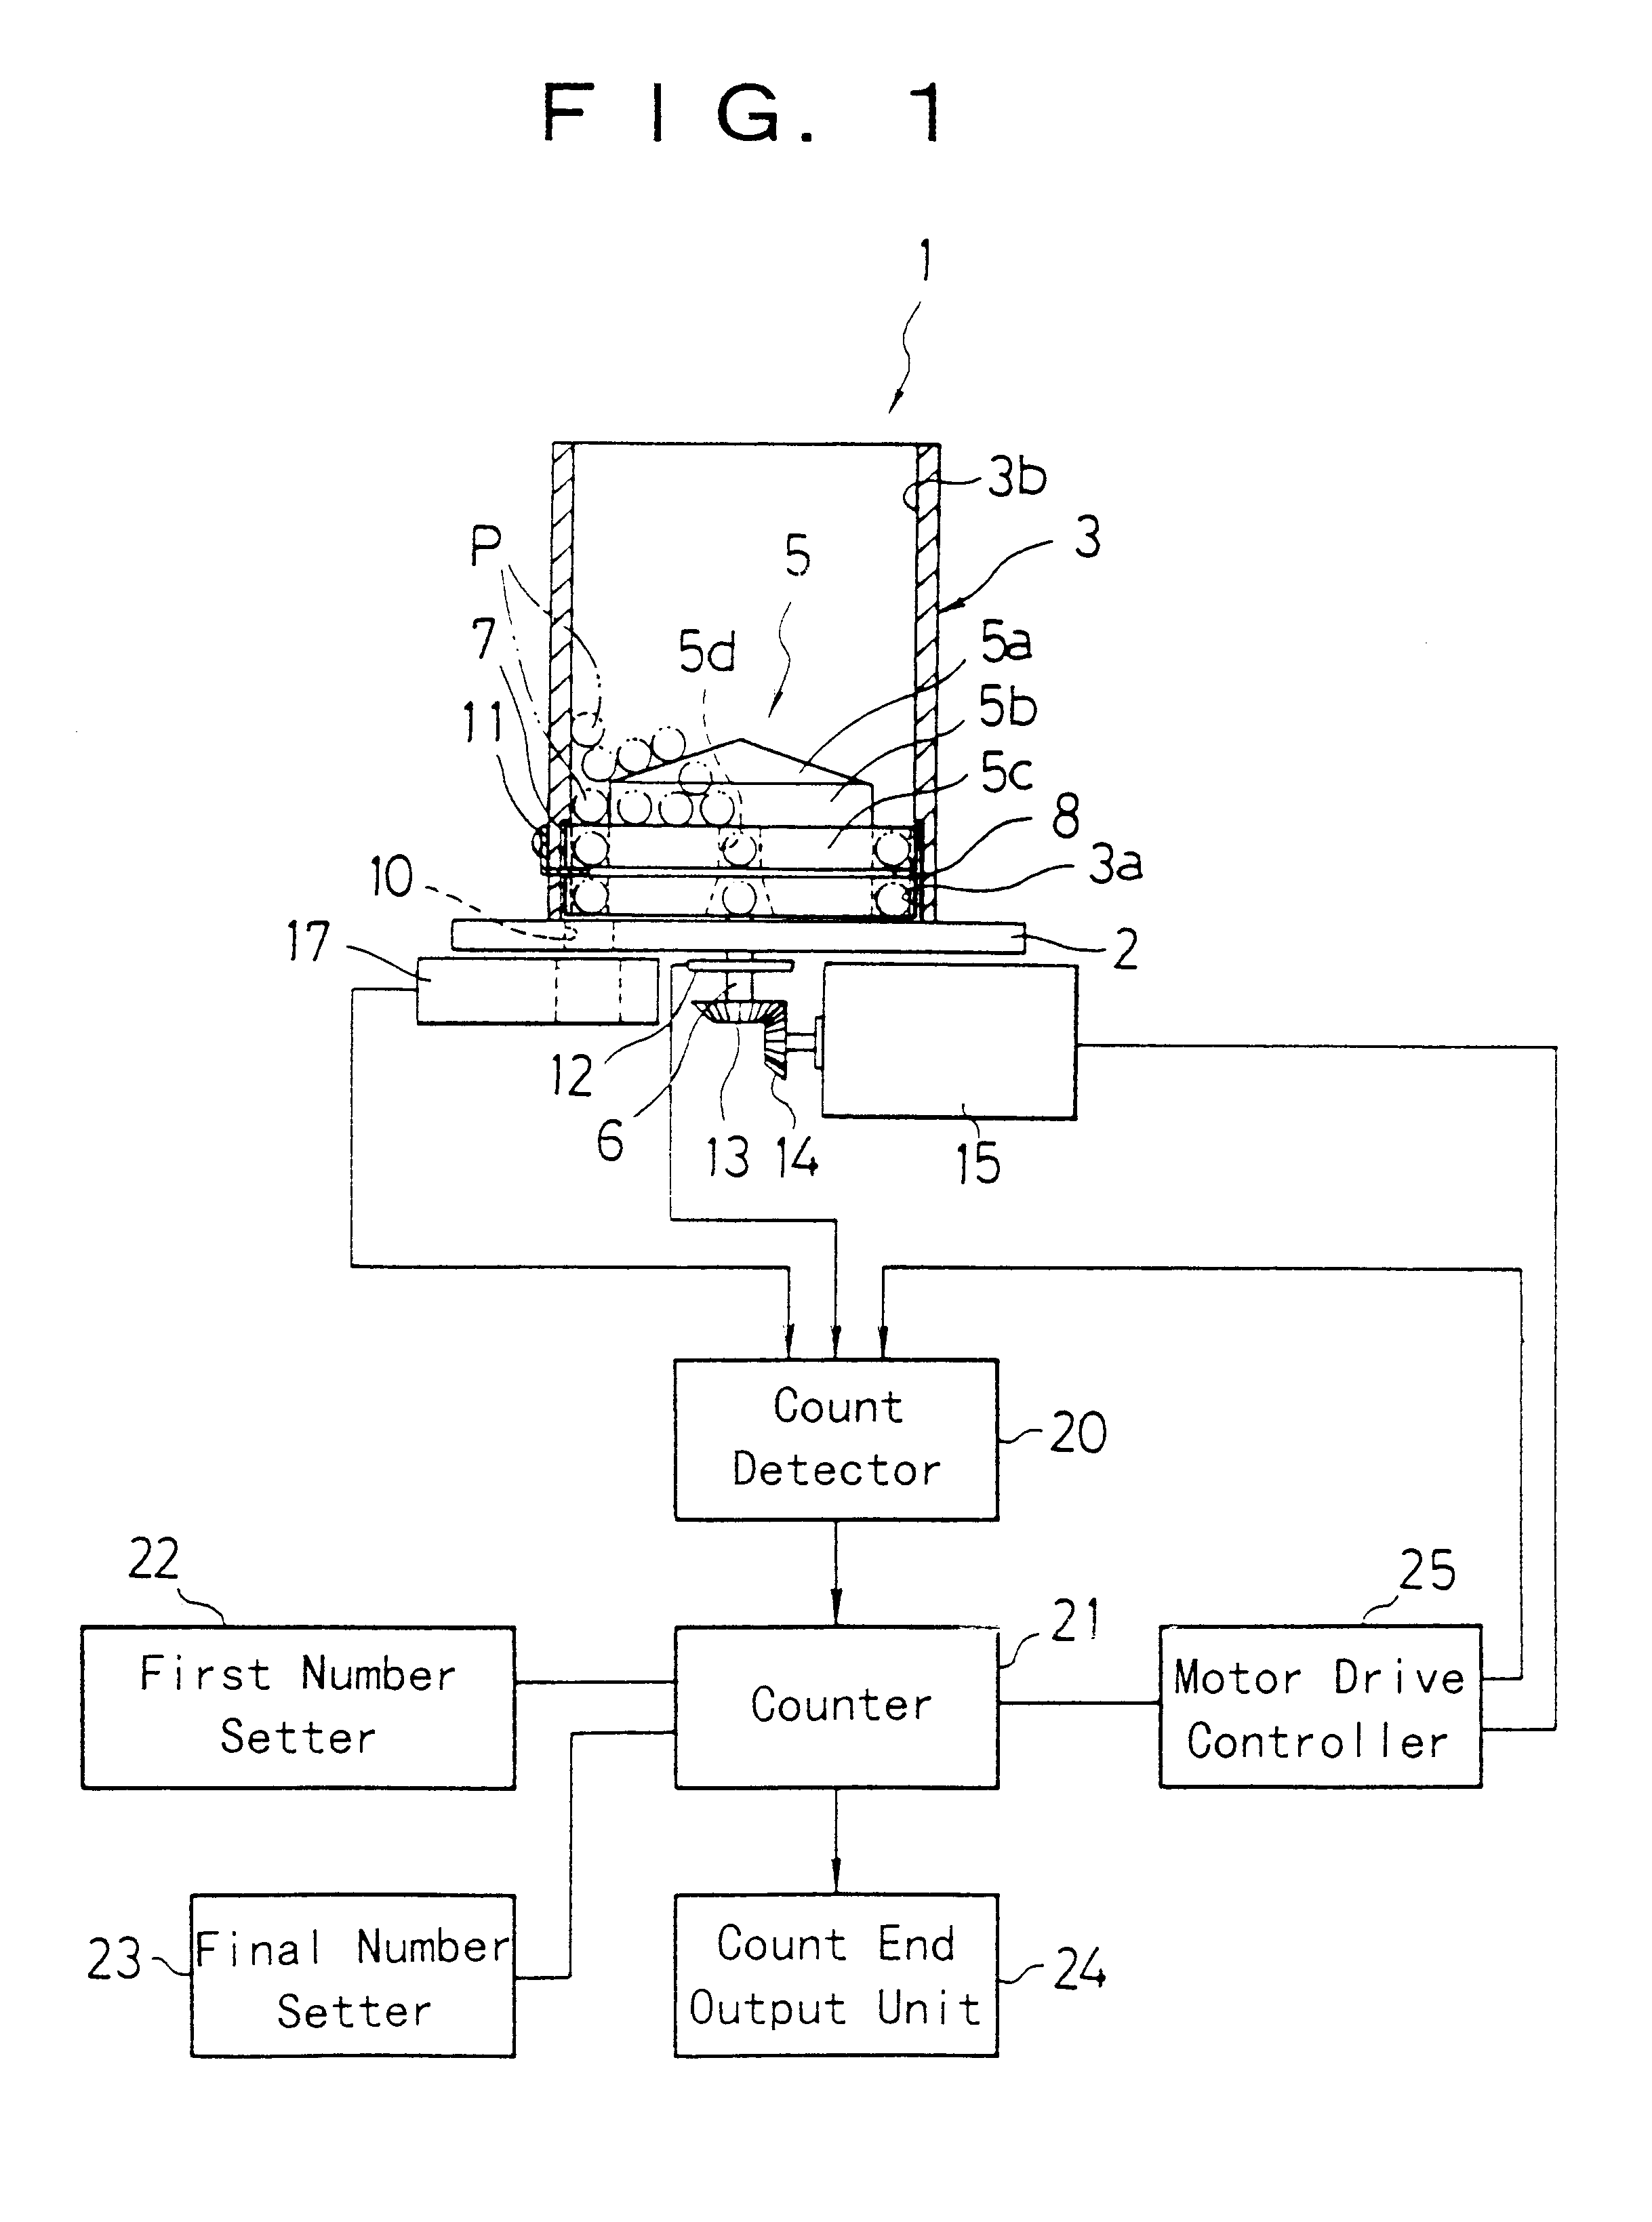 Automatic high-speed pill counting apparatus